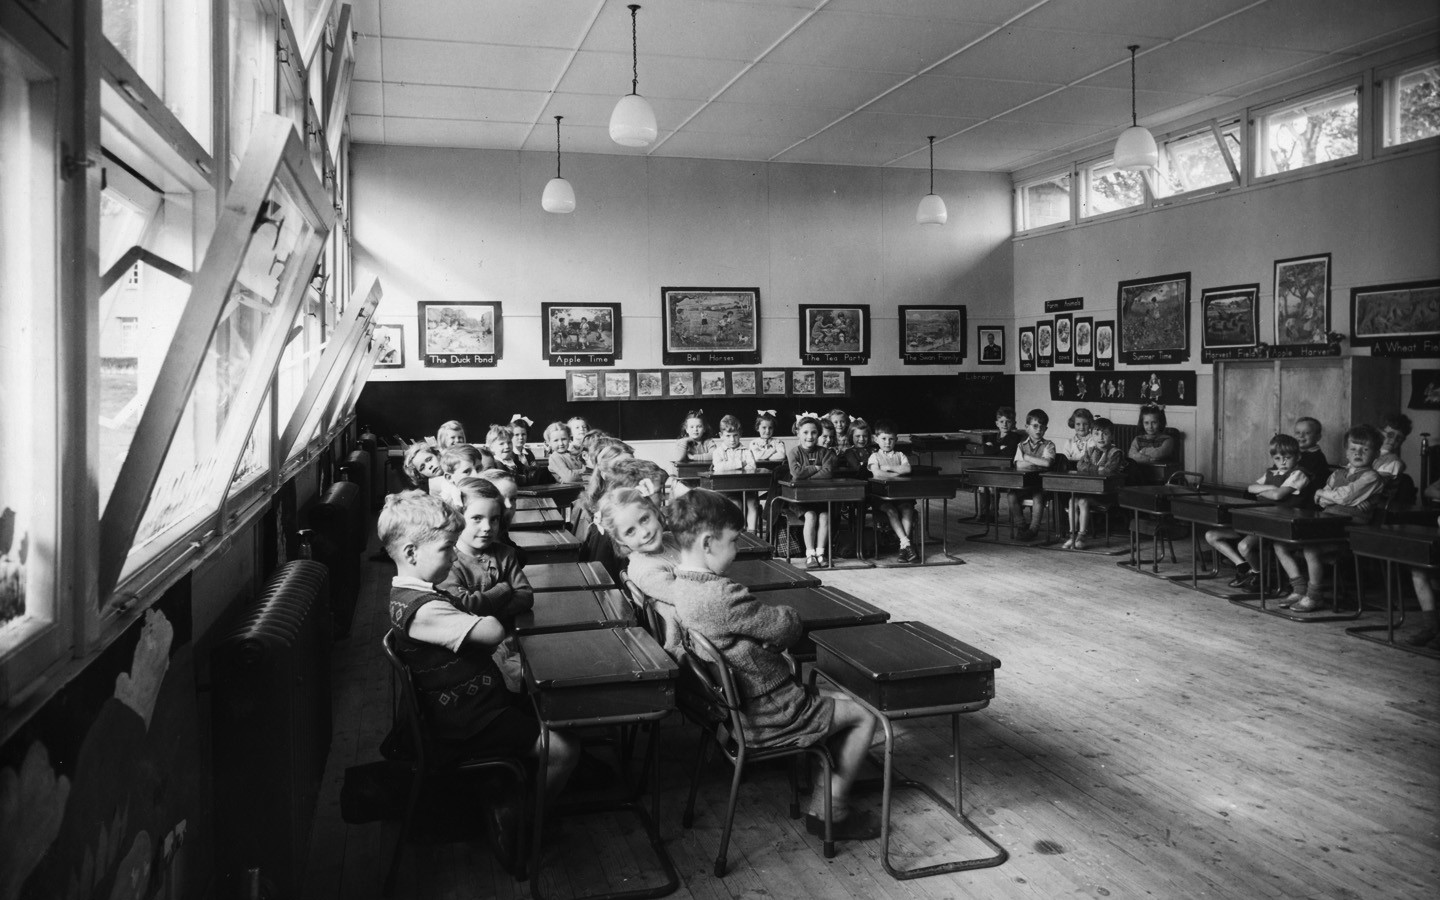 An old black and white photo of a class room where there are children sitting at their desks.